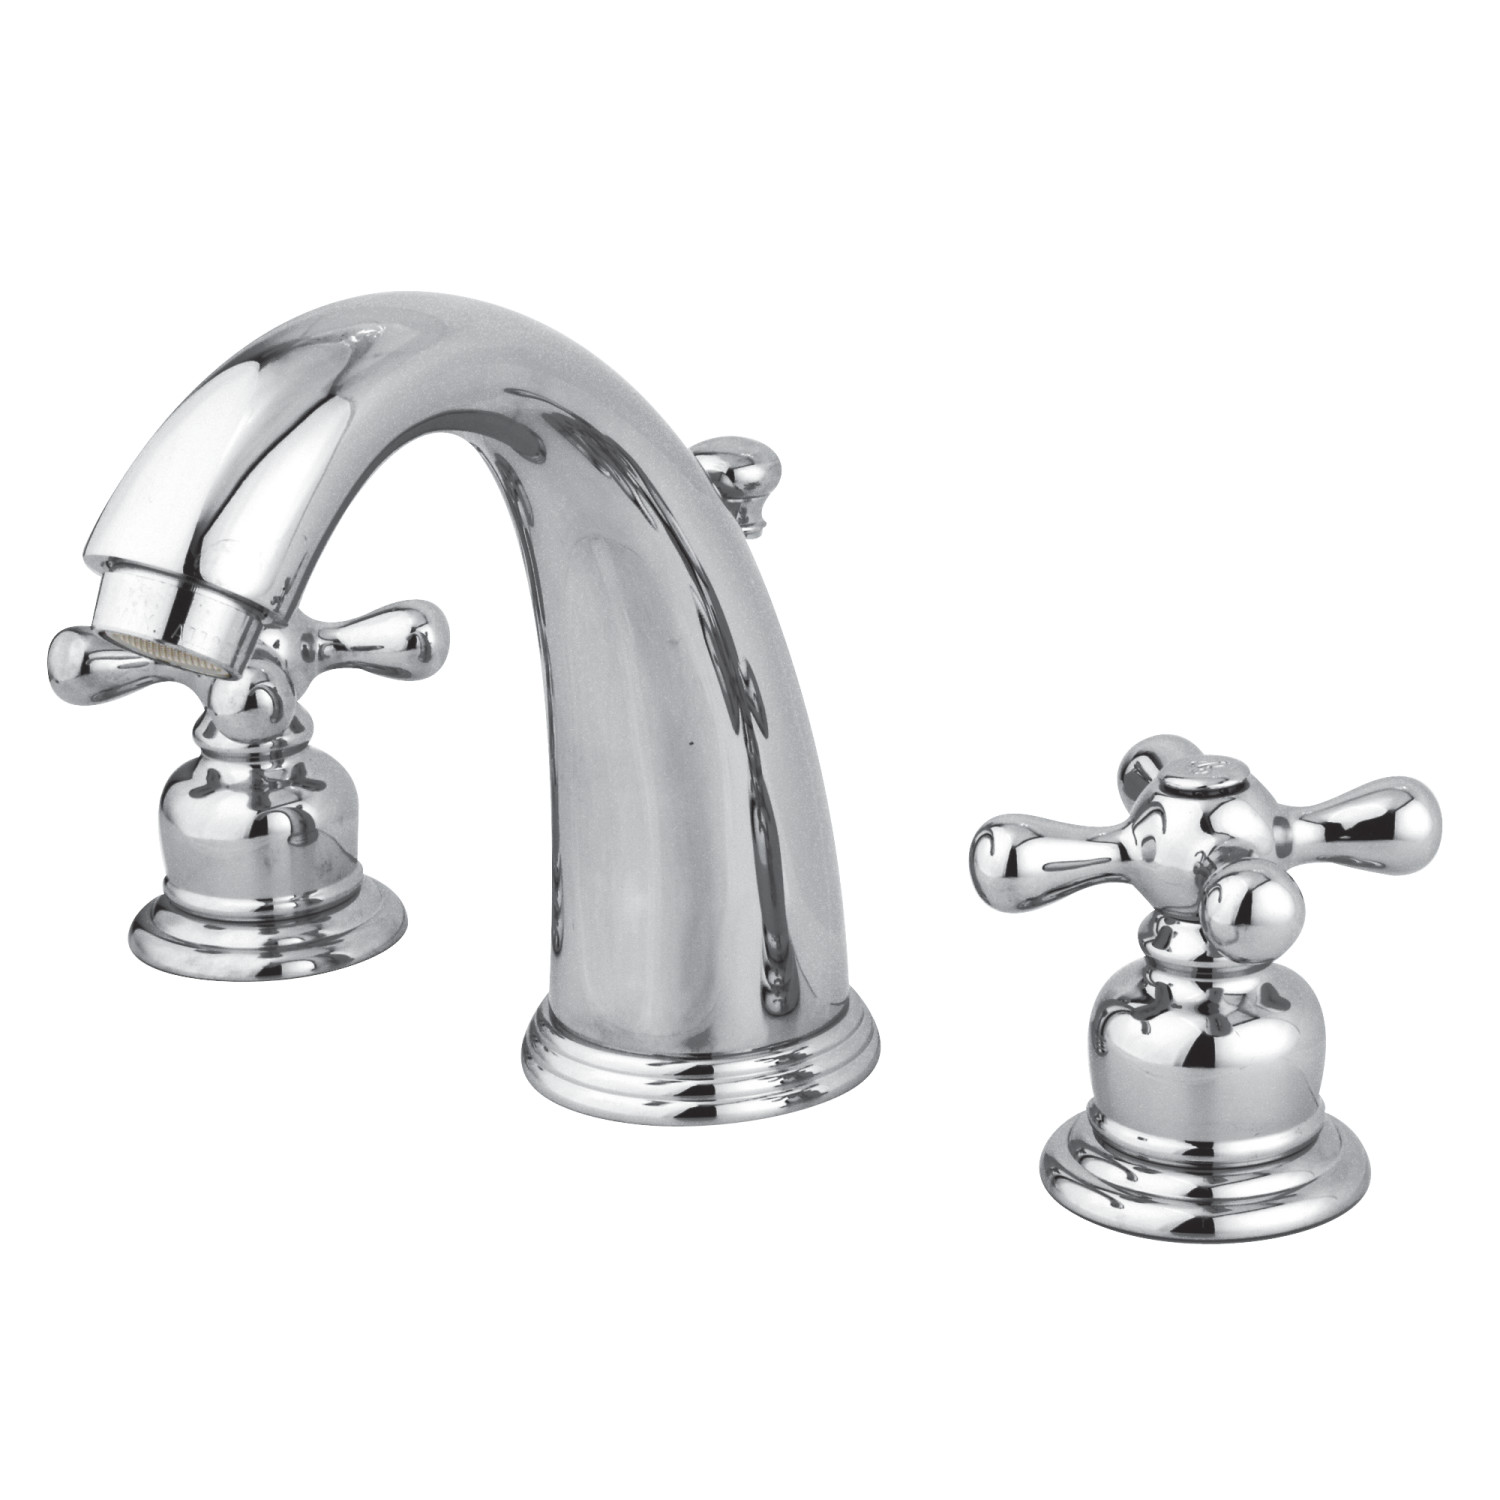 Vintage 2-Handle Three-Hole Deck Mounted Widespread Bathroom Faucet with Plastic Pop-Up in Polished Chrome